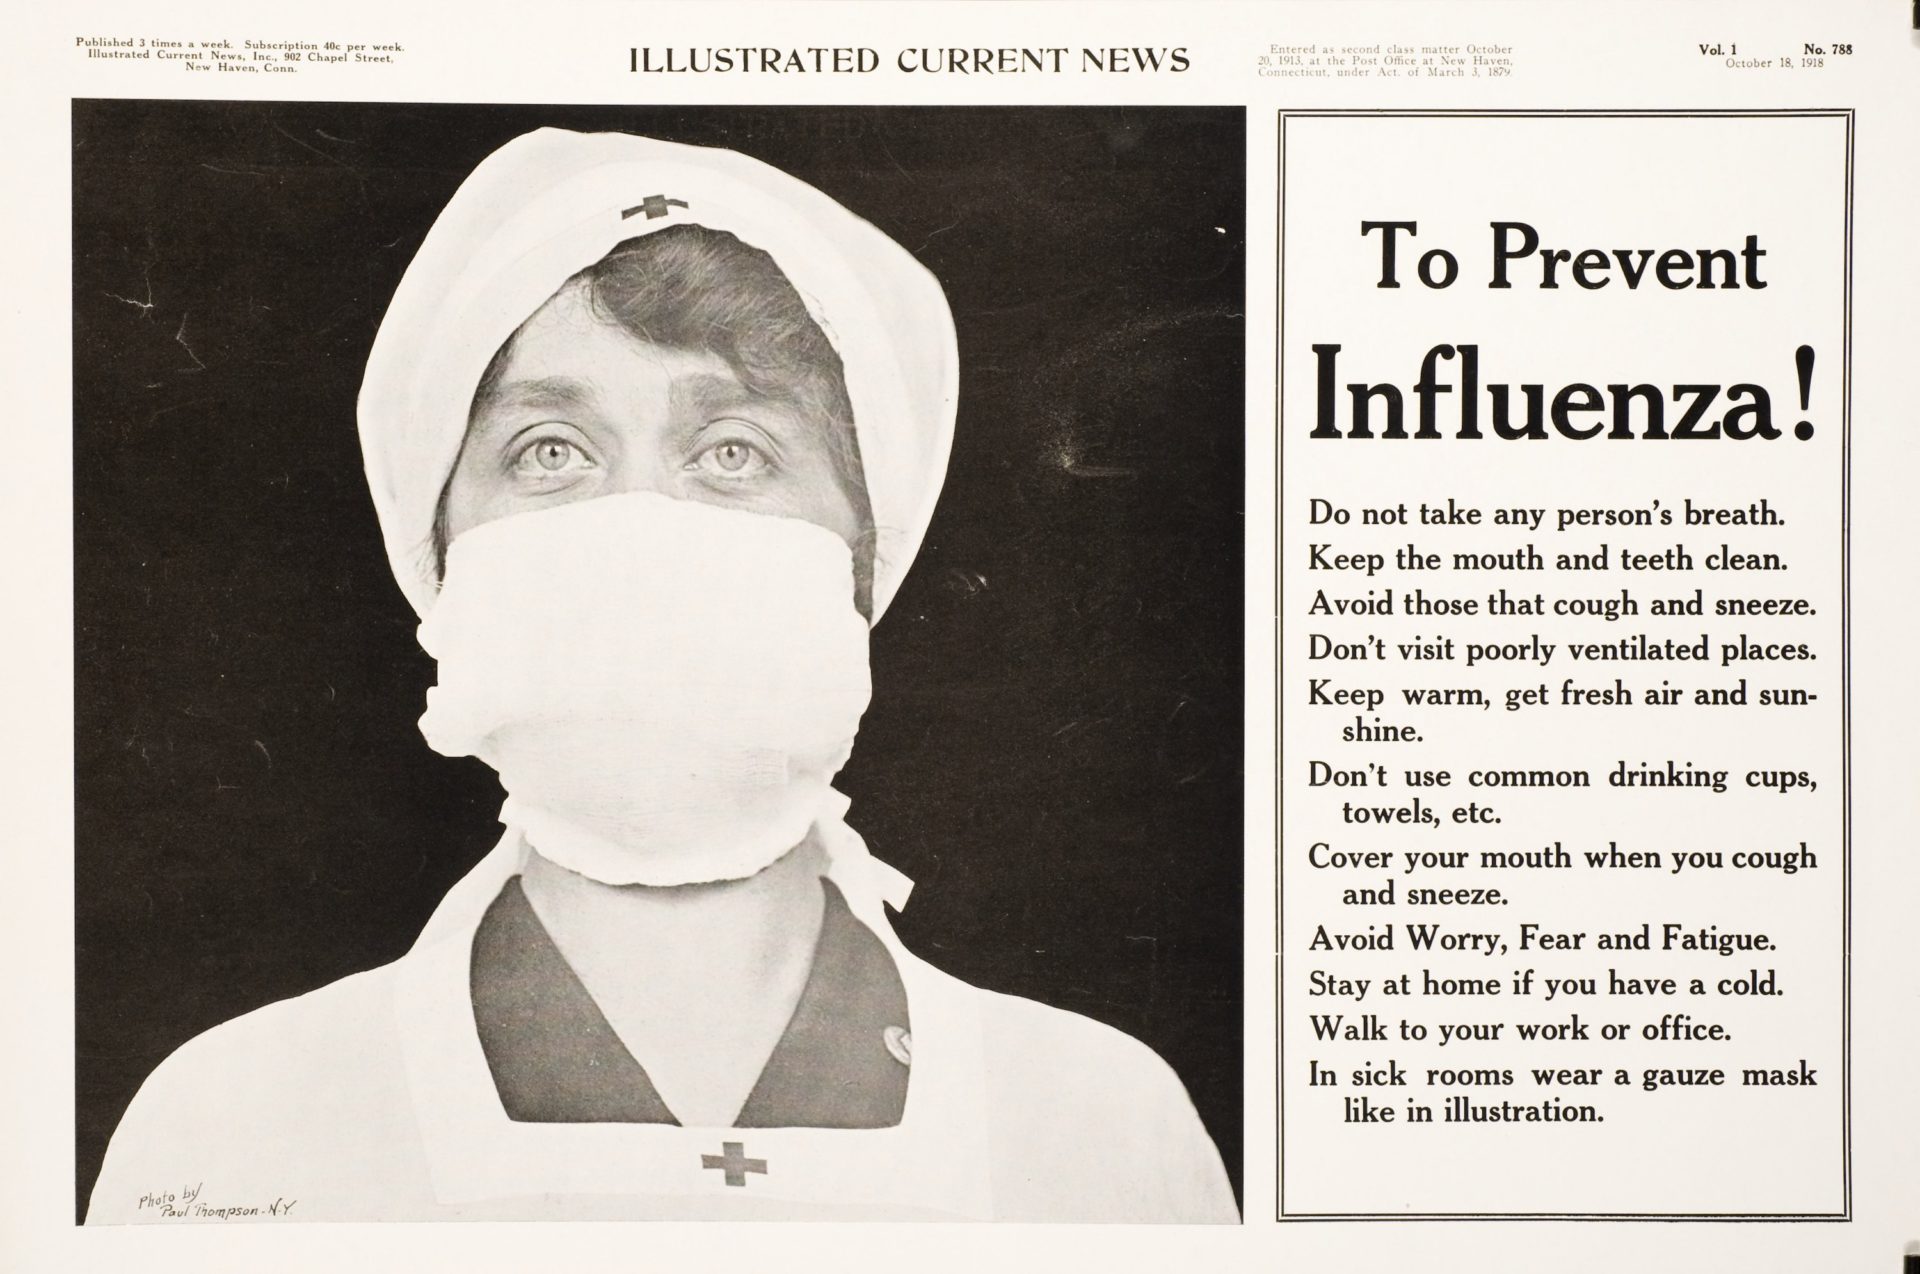 Image of nurse wearing face mask with instructions on preventing flu spreading